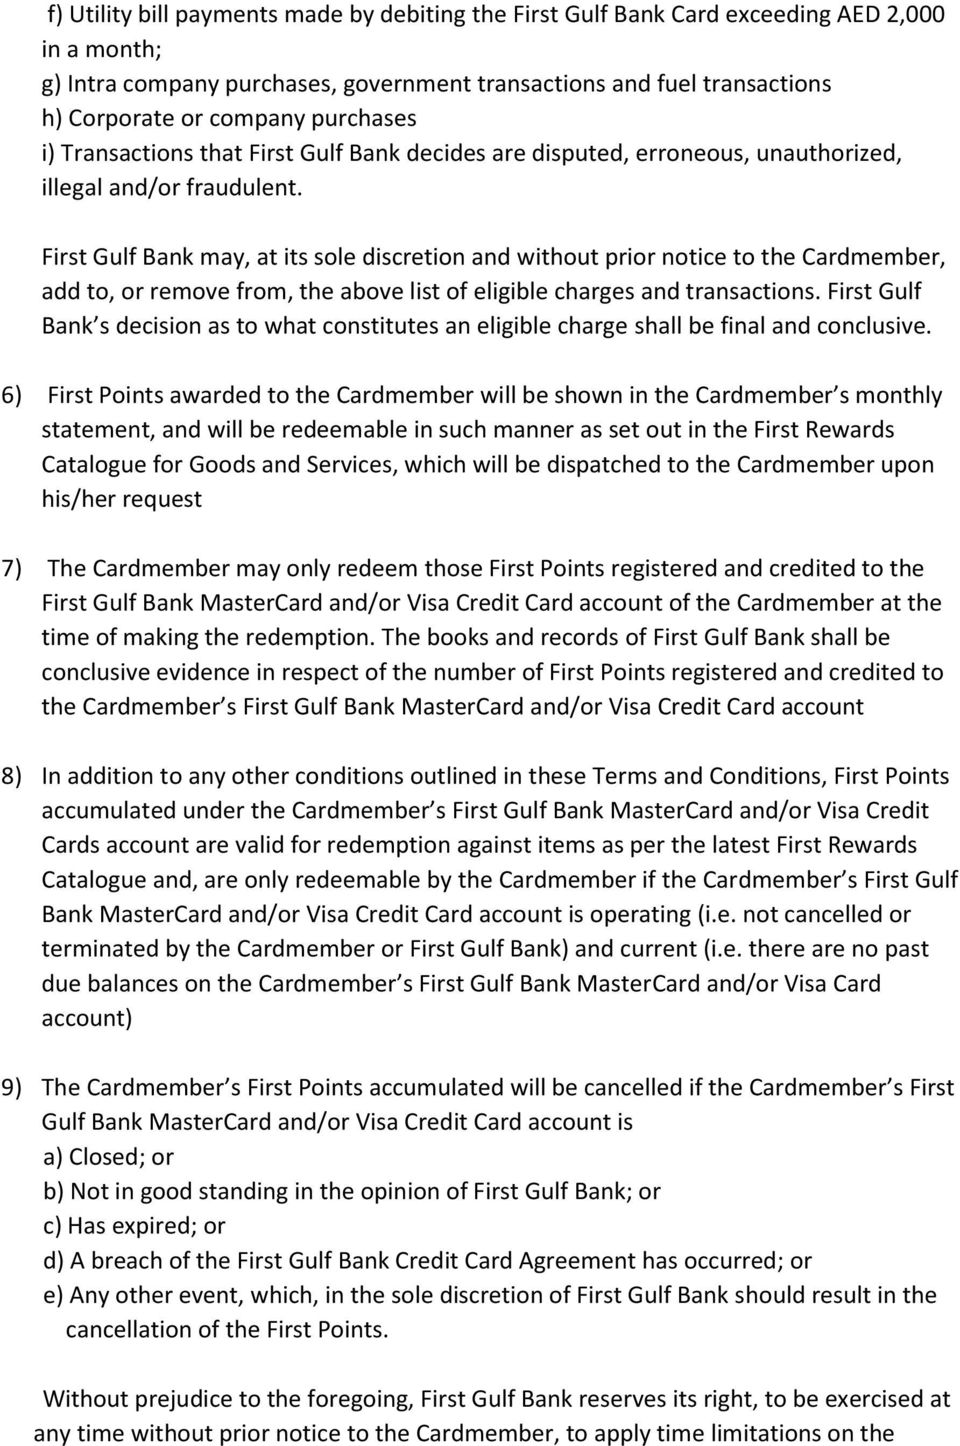 First Gulf Bank may, at its sole discretion and without prior notice to the Cardmember, add to, or remove from, the above list of eligible charges and transactions.